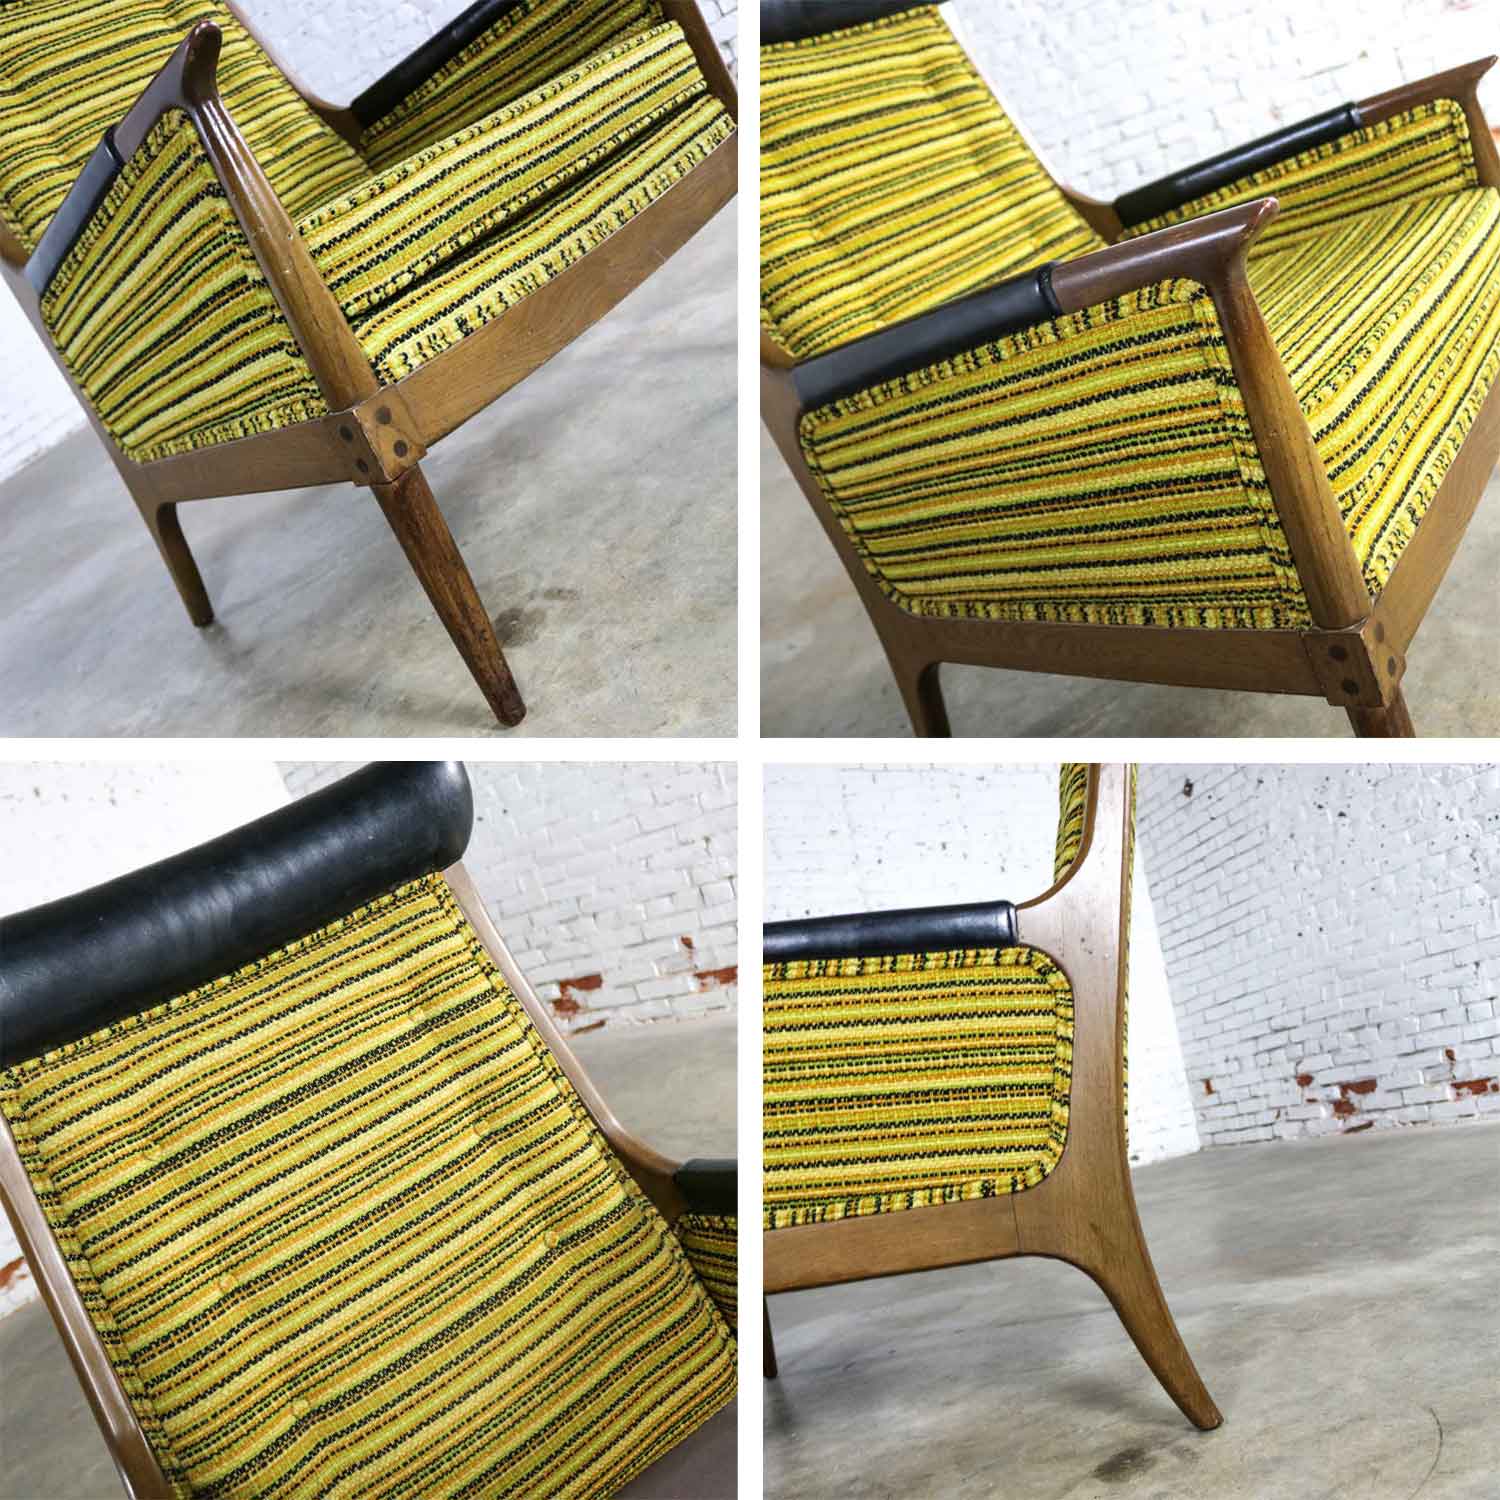 Mid Century Modern Horn Style Armchair with Green Gold & Black Horizontal Striped UpholsteryMid Century Modern Horn Style Armchair with Green Gold & Black Horizontal Striped Upholstery